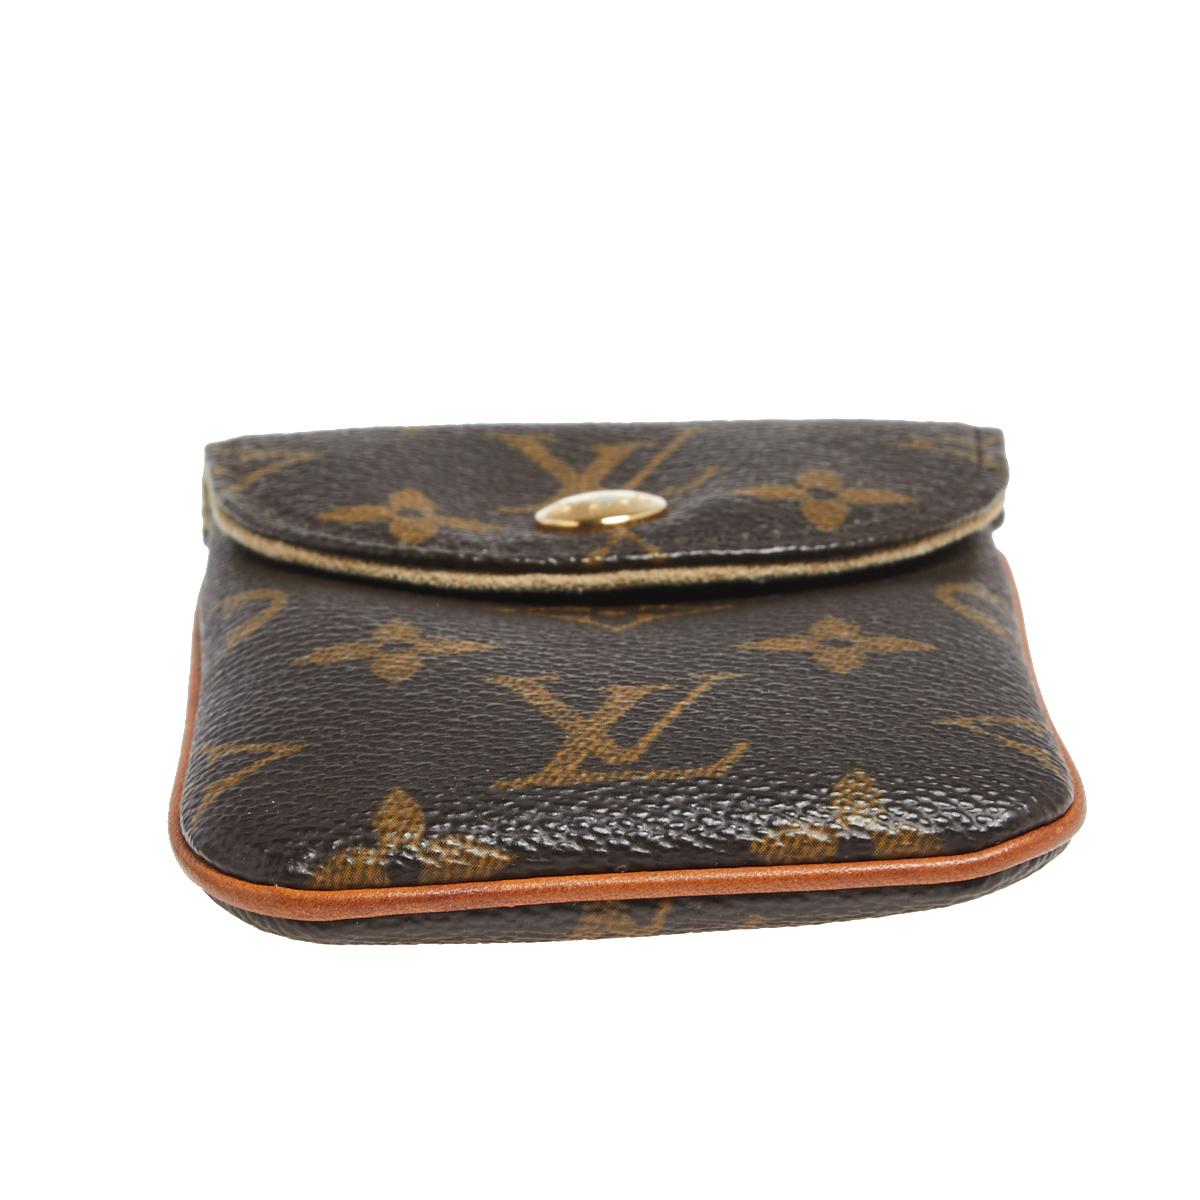 This Etui MM phone case from the House of Louis Vuitton has been designed to keep your phone safe and secured all the time. It is created using Monogram canvas and finished with gold-tone hardware and leather trims. The flap leads us to the